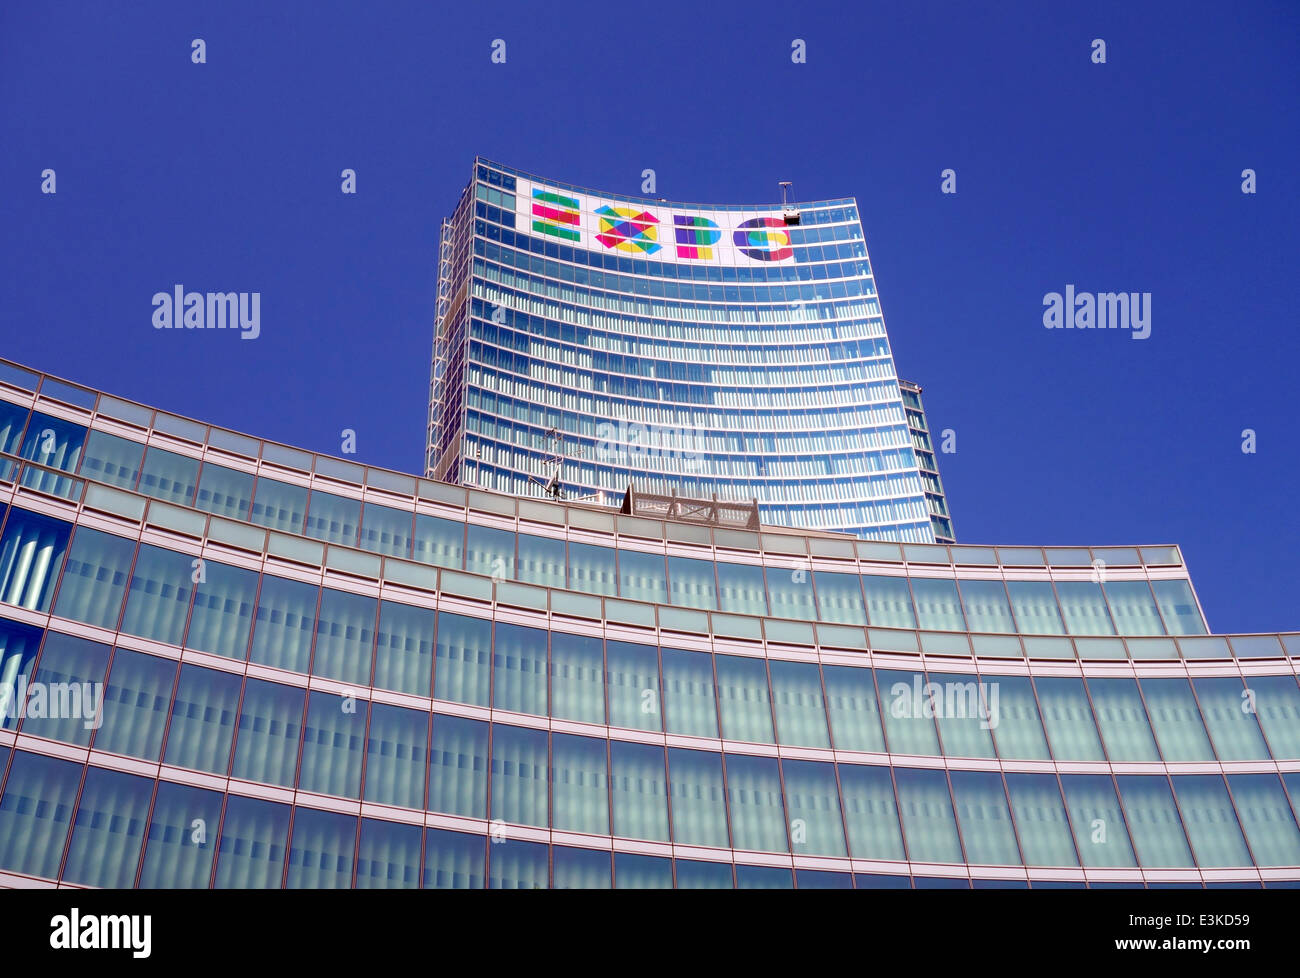 Palazzo Lombardia ('Lombardy Building') is a complex of buildings in Milan, Italy, including a 39-storey, 161.3 m (529 ft) tall Stock Photo